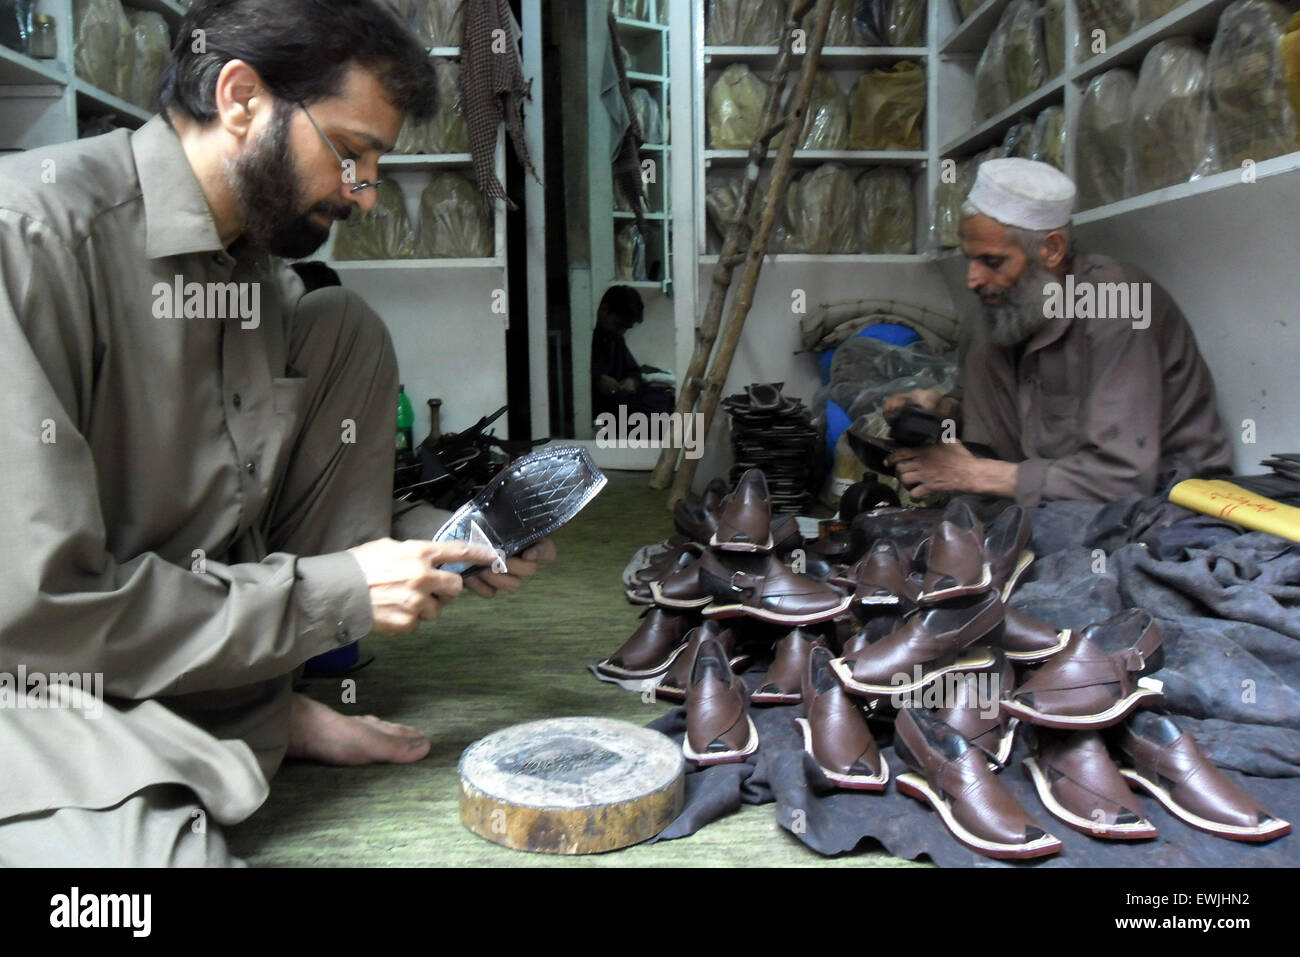 Peshawar. 27th June, 2015. Pakistani people make traditional Peshawari Chappal at a workshop in northwest Pakistan's Peshawar, June 27, 2015. Peshawari Chappal is a traditional footwear of Pakistan, worn especially by Pashtuns in the Khyber Pakhtunkhwa region of Pakistan. © Ahmad Sidique/Xinhua/Alamy Live News Stock Photo